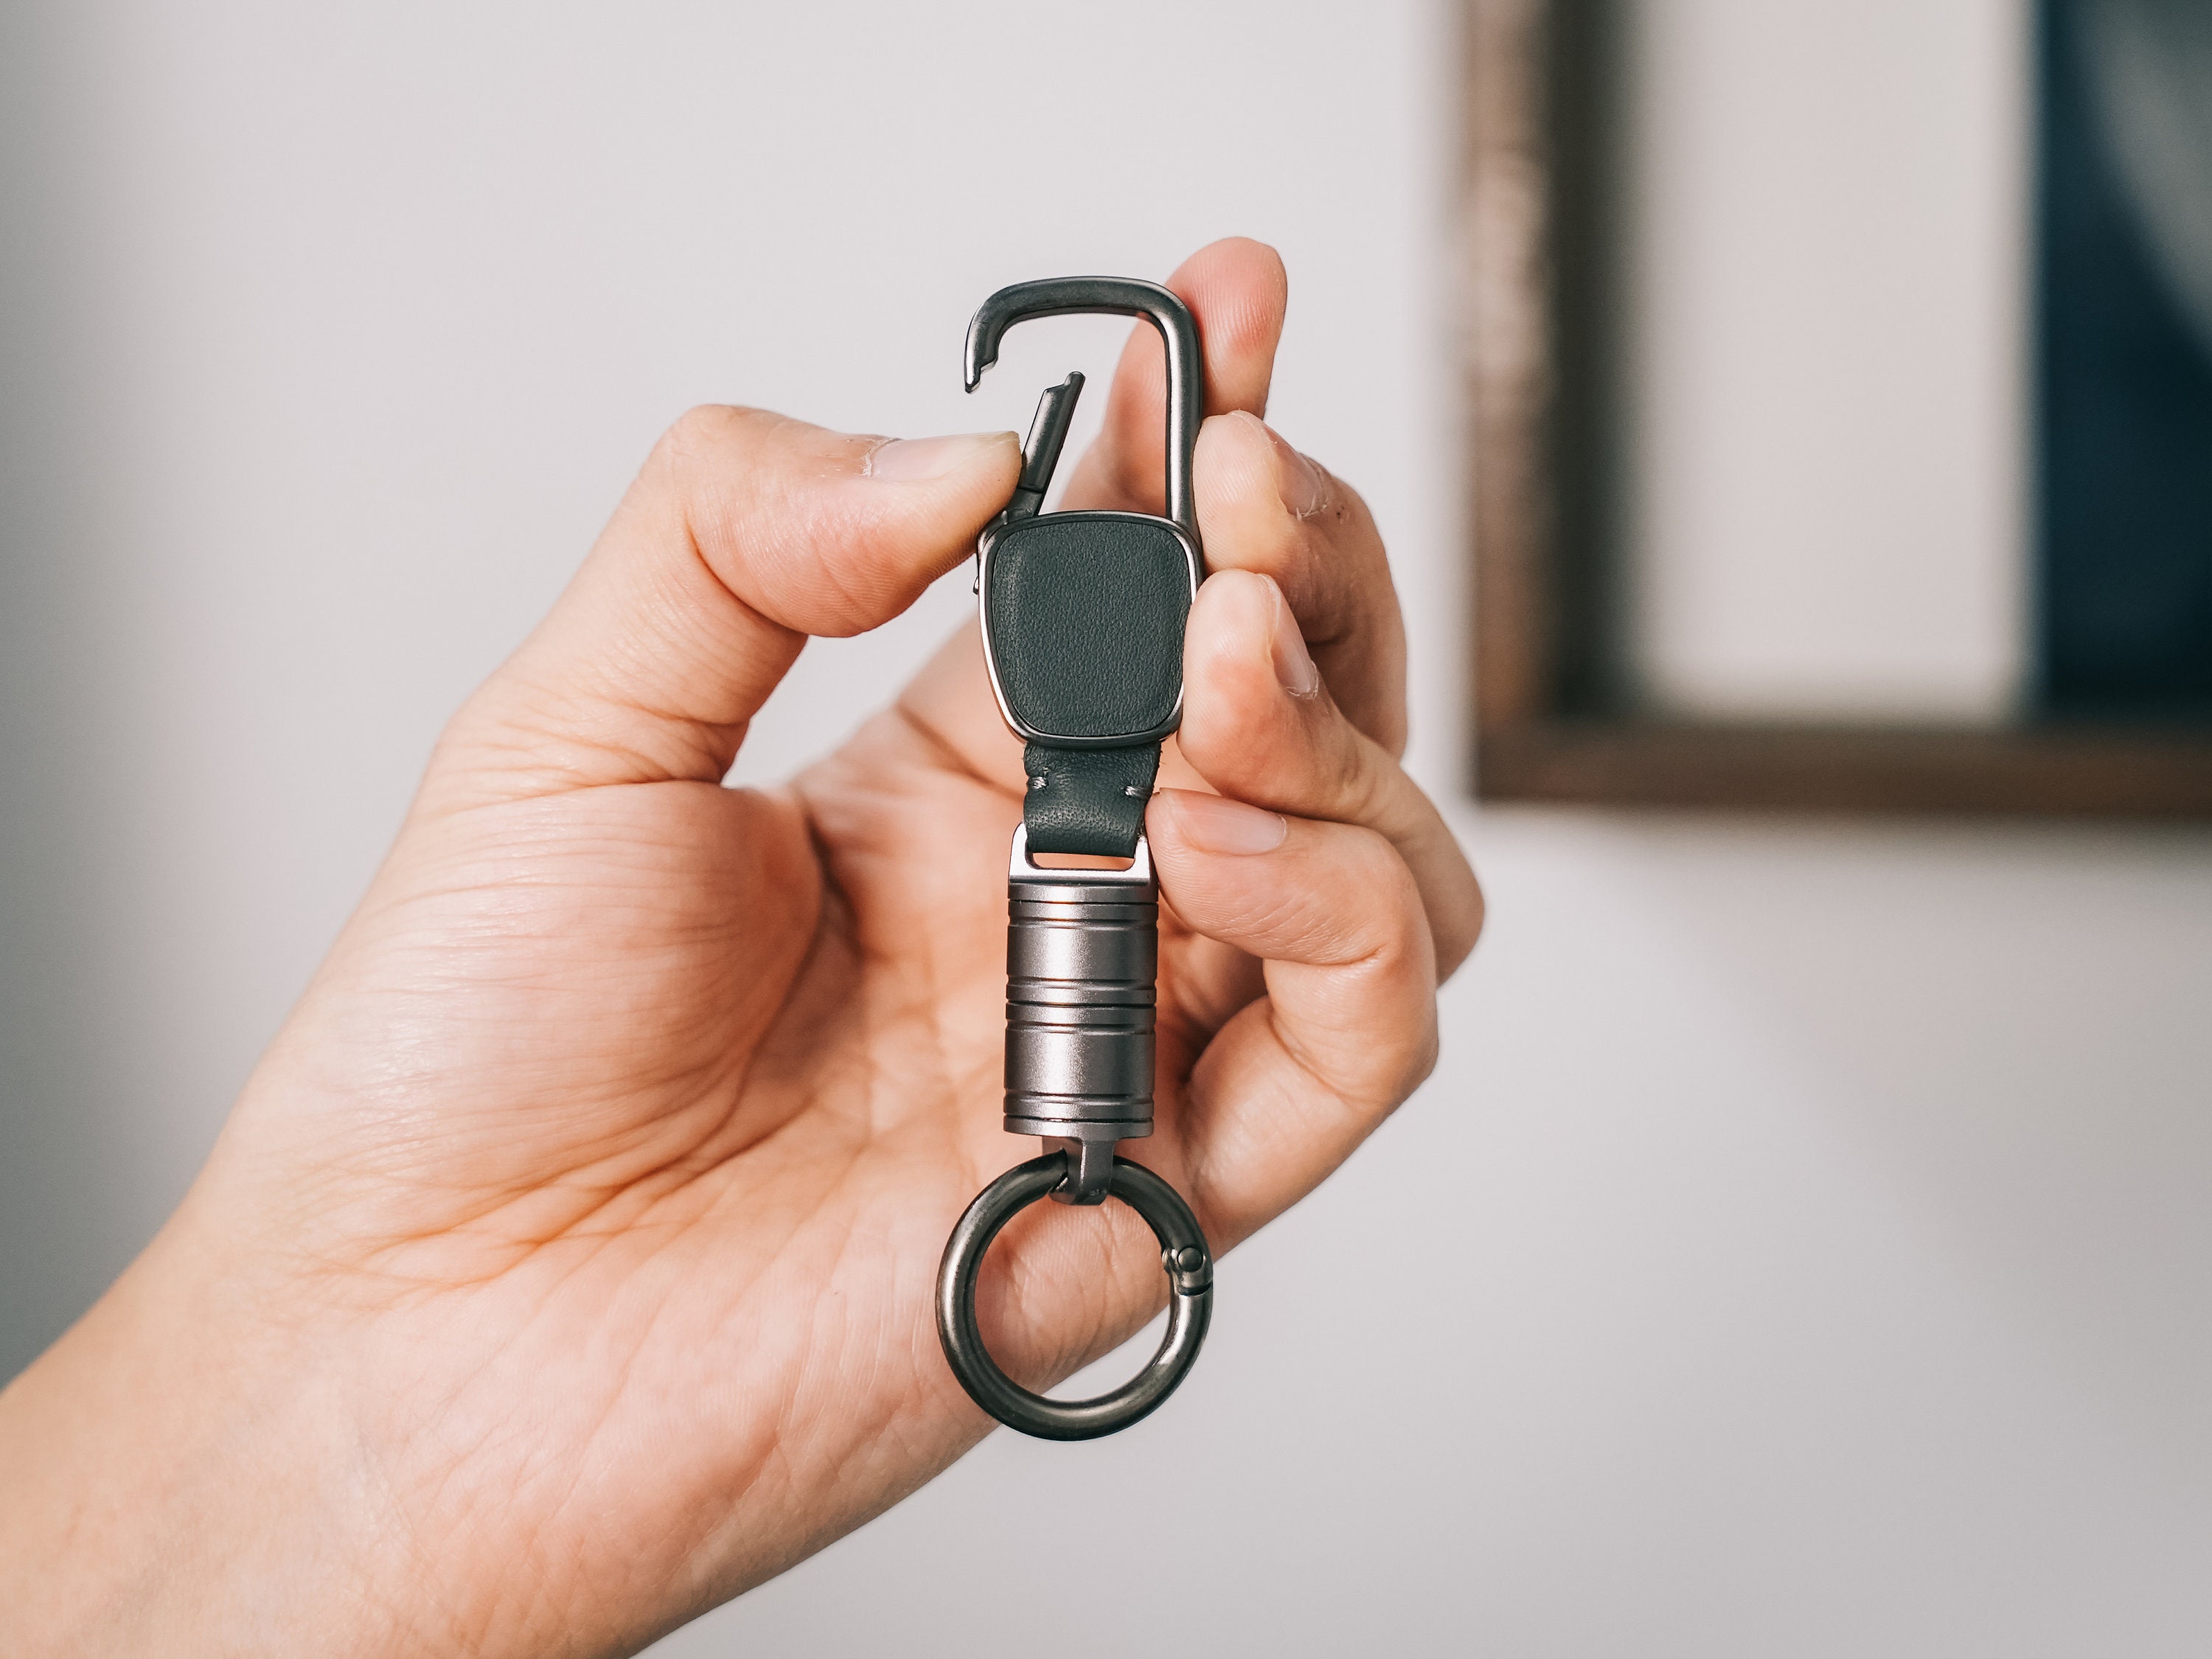 Augoing Keychain,Key Ring Clip for Men,Universal Key Chain Hook with Quick Release,Heavy Duty Key Chain for Car Keys,Carabiner Without Spring Inside.